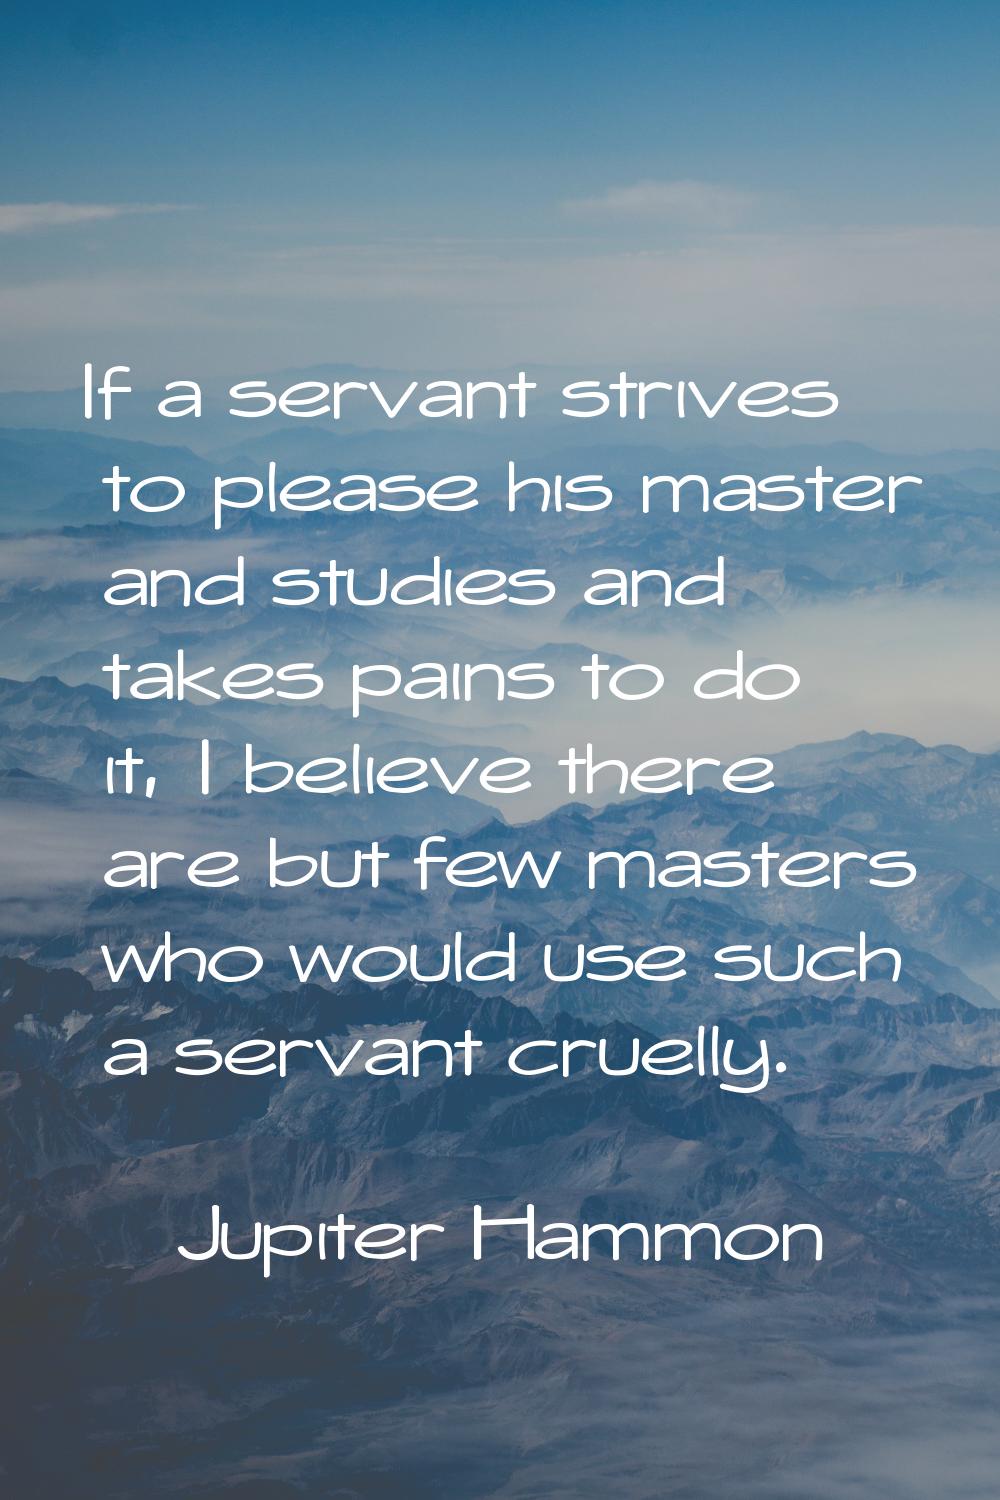 If a servant strives to please his master and studies and takes pains to do it, I believe there are